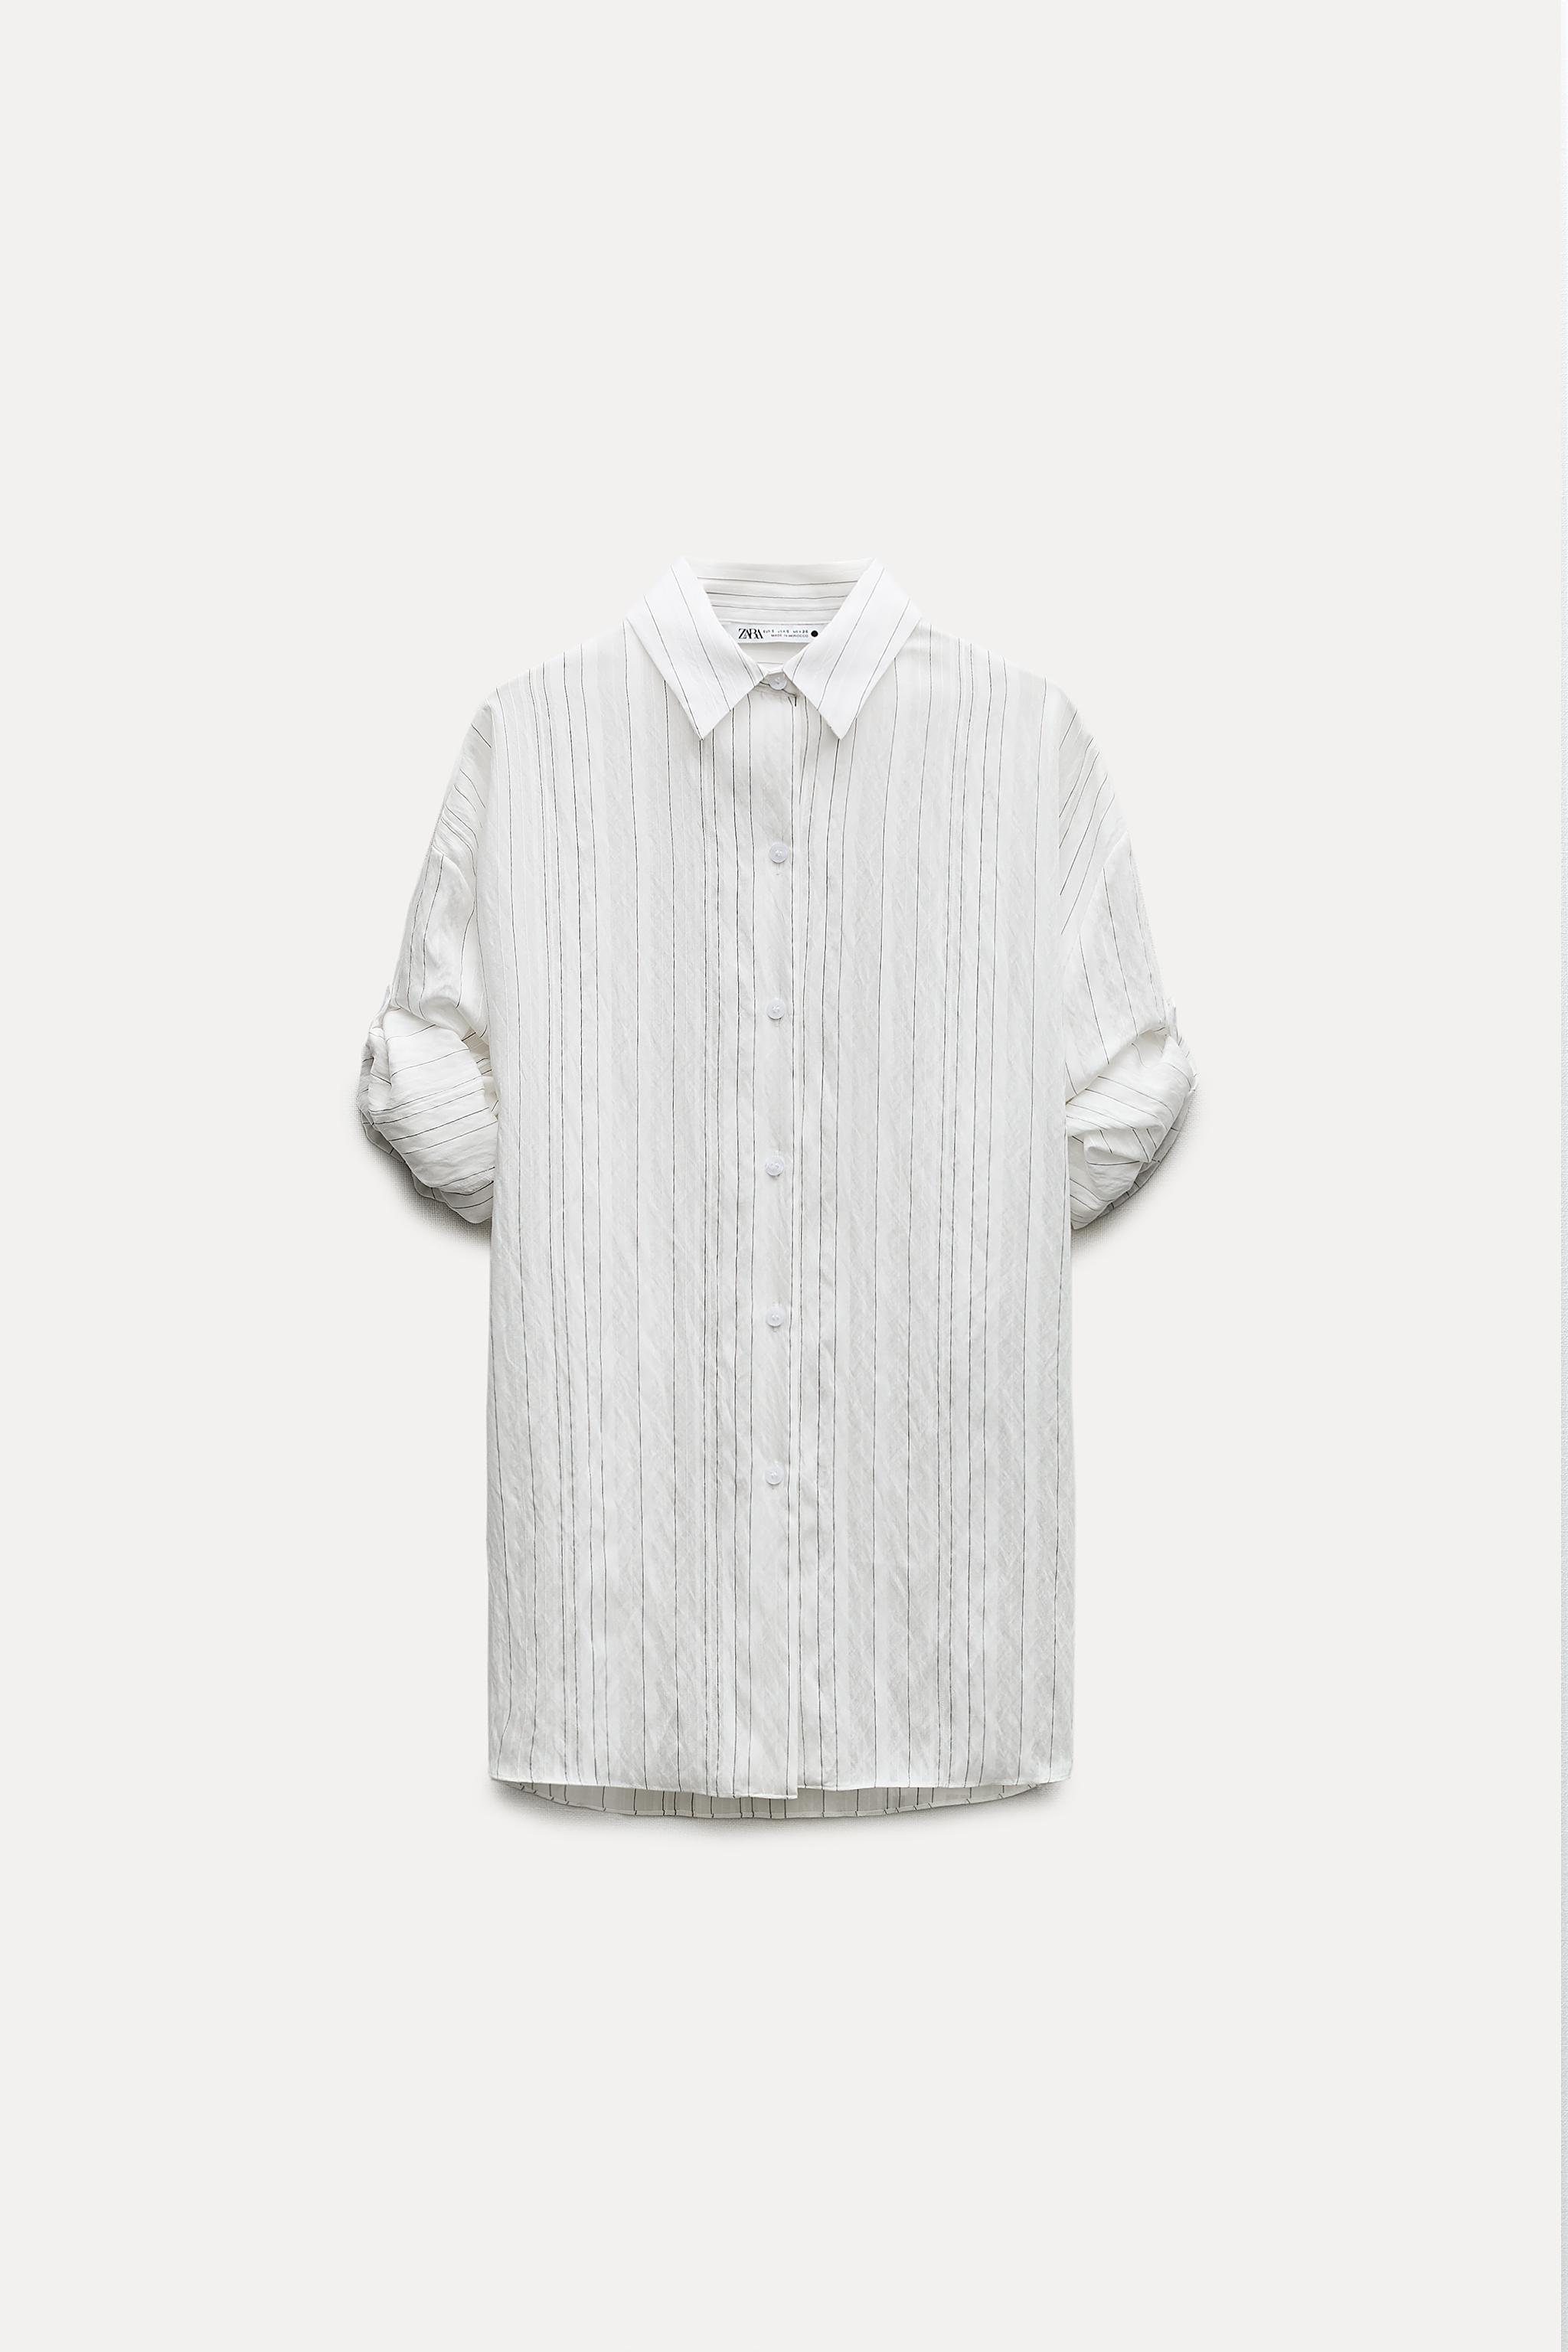 ZW COLLECTION MULTIPOSITIONAL STRIPED SHIRT - Black / White | ZARA 